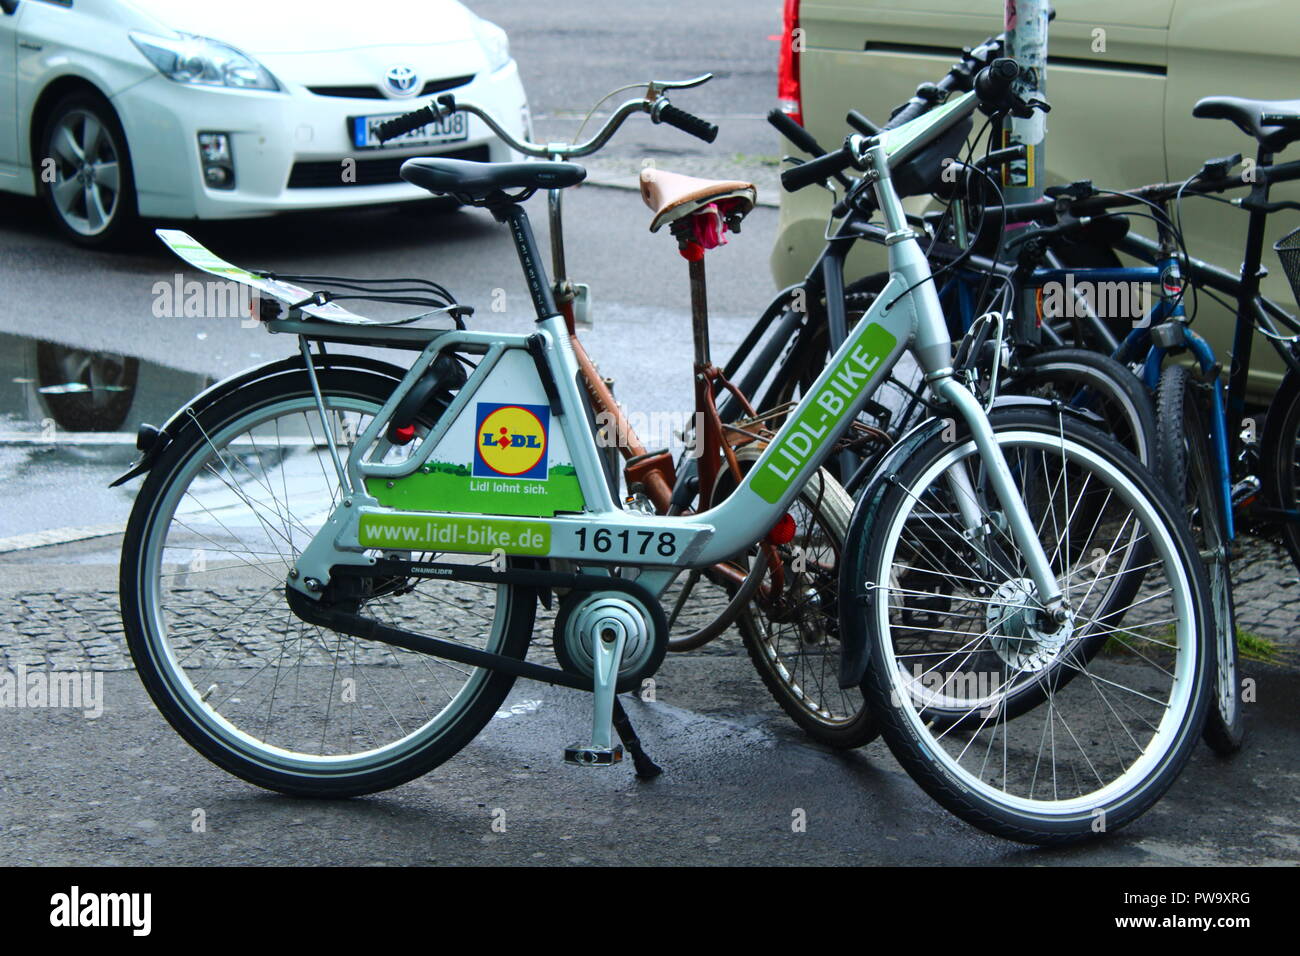 Bike Sharing Scheme High Resolution Stock Photography and Images - Alamy